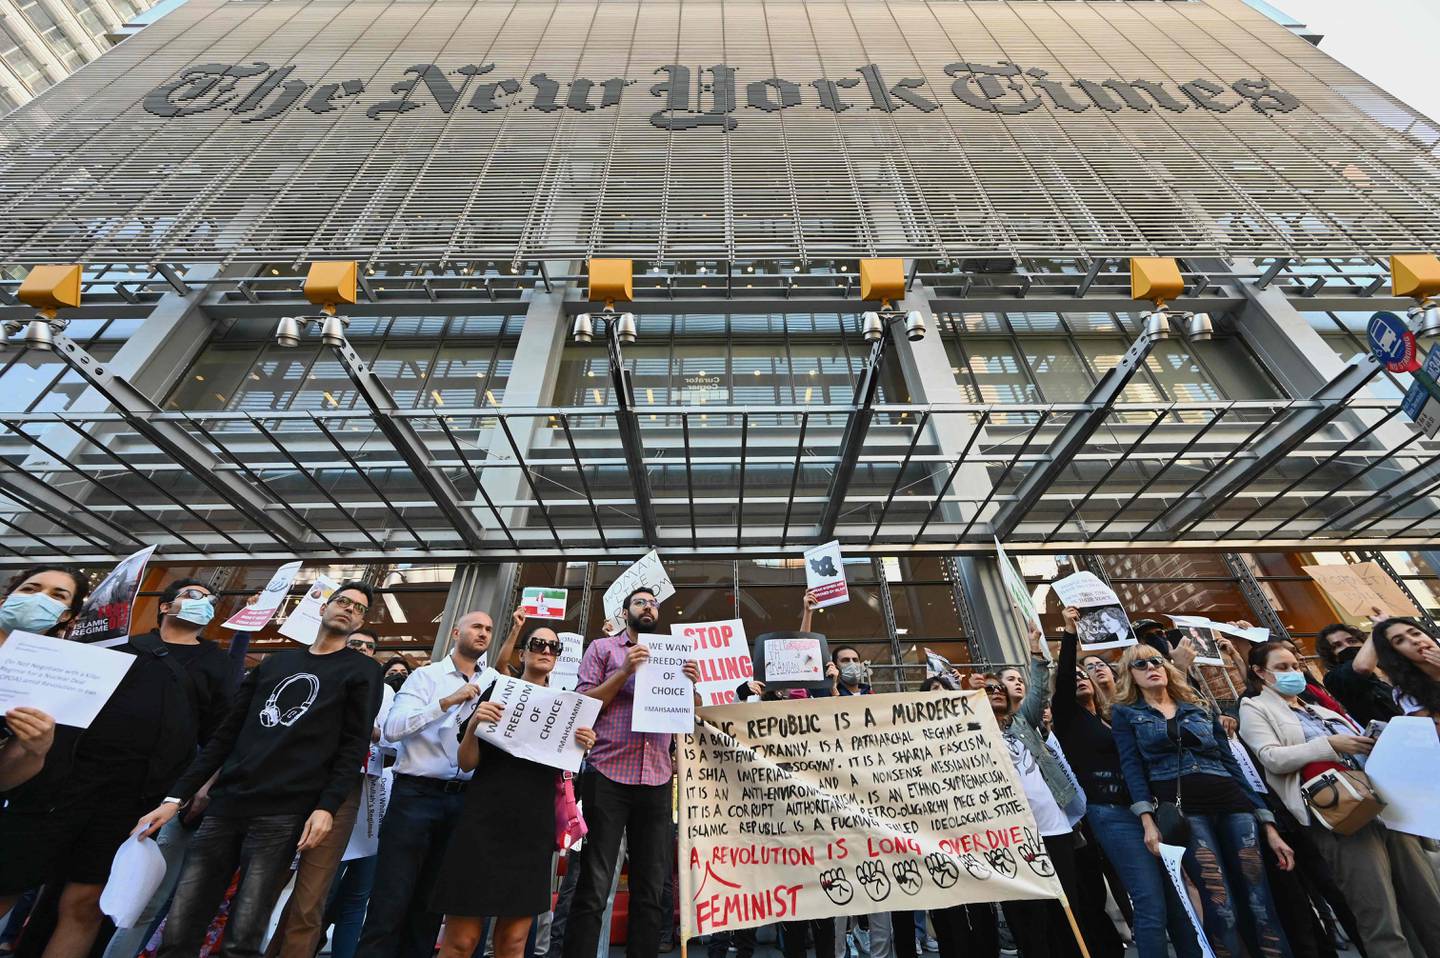 Activists said they were also protesting against "bias and selective narrative" in 'The New York Times' coverage of Iran in recent years. AFP